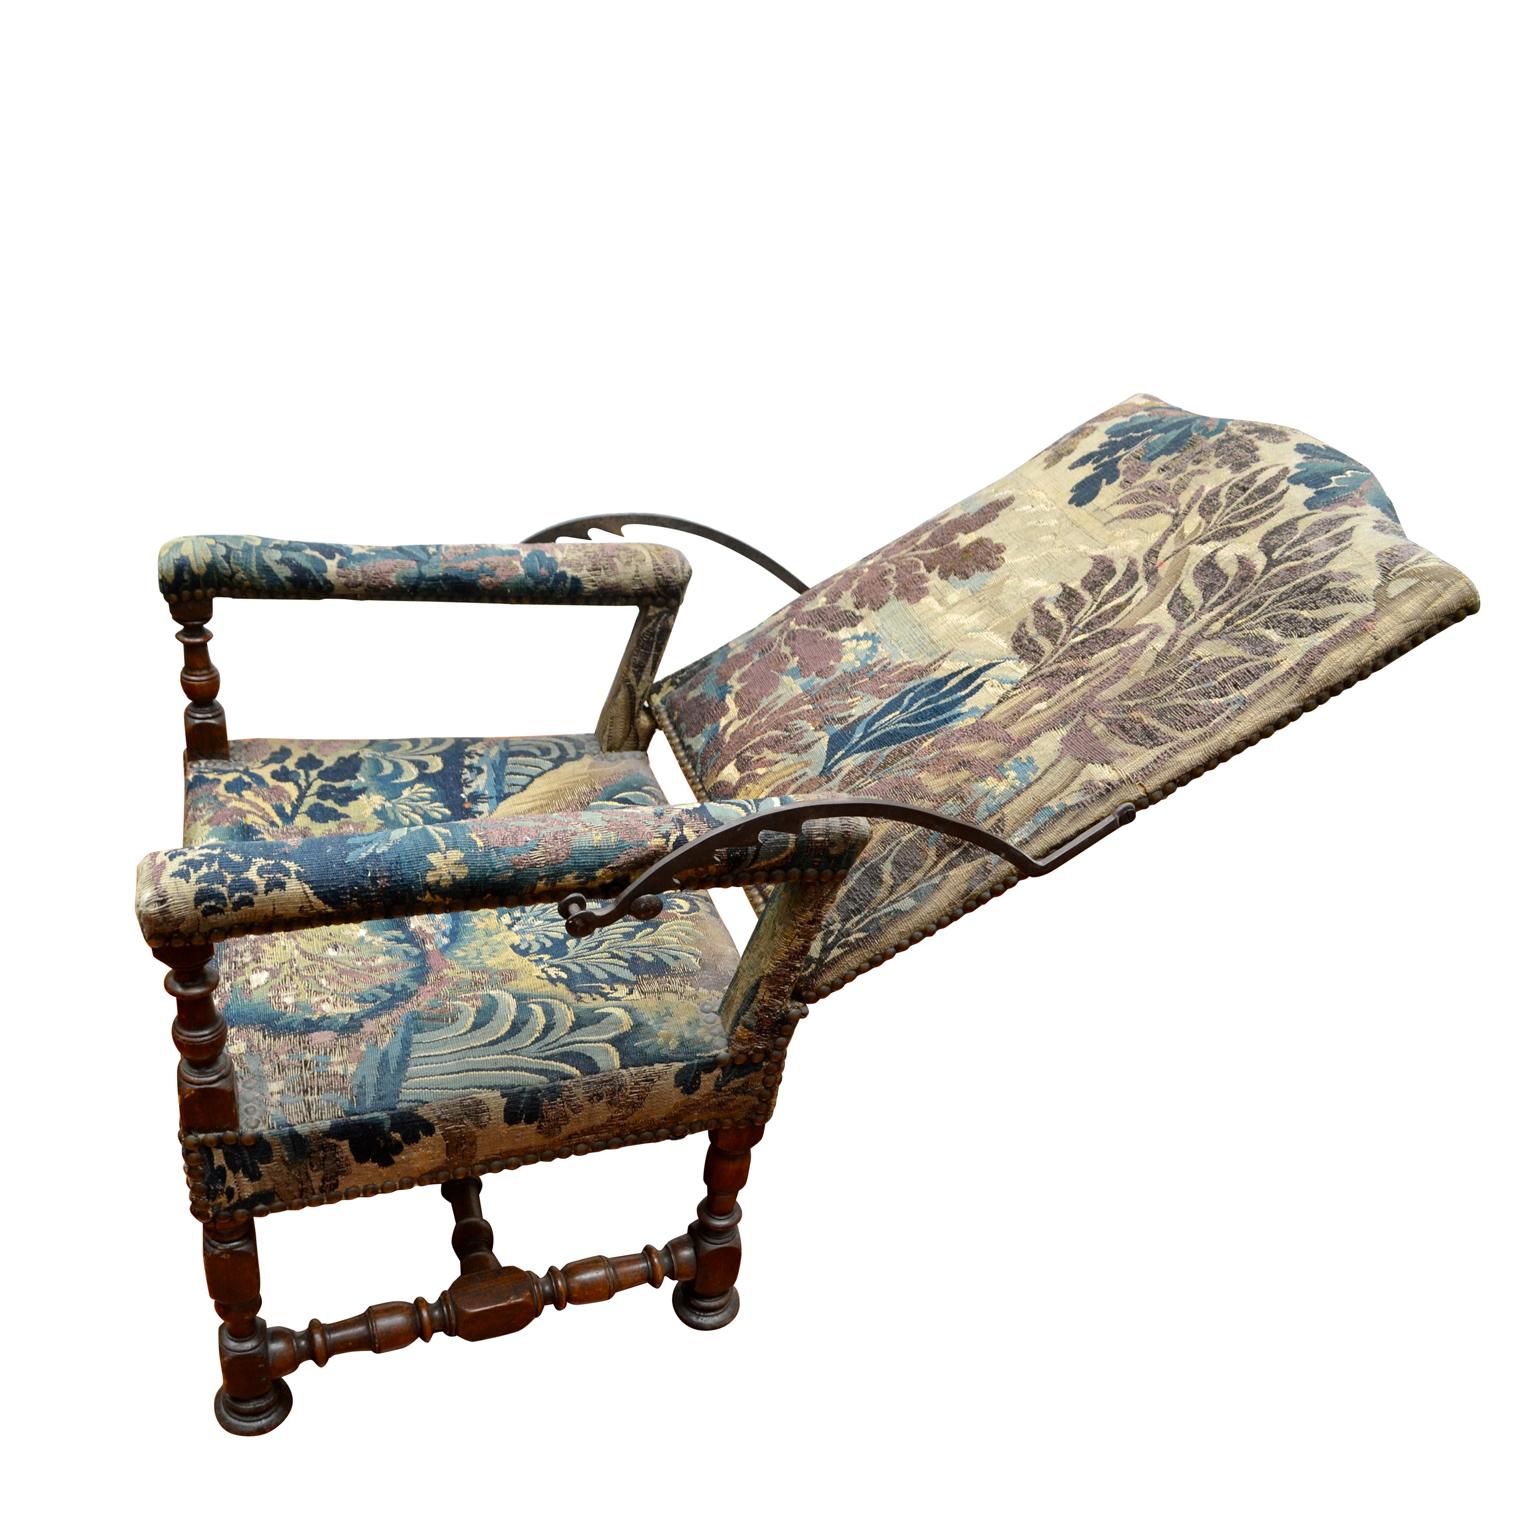 Louis XIV French Tapestry Reclining Armchair, a Veritable Medieval La-Z-boy For Sale